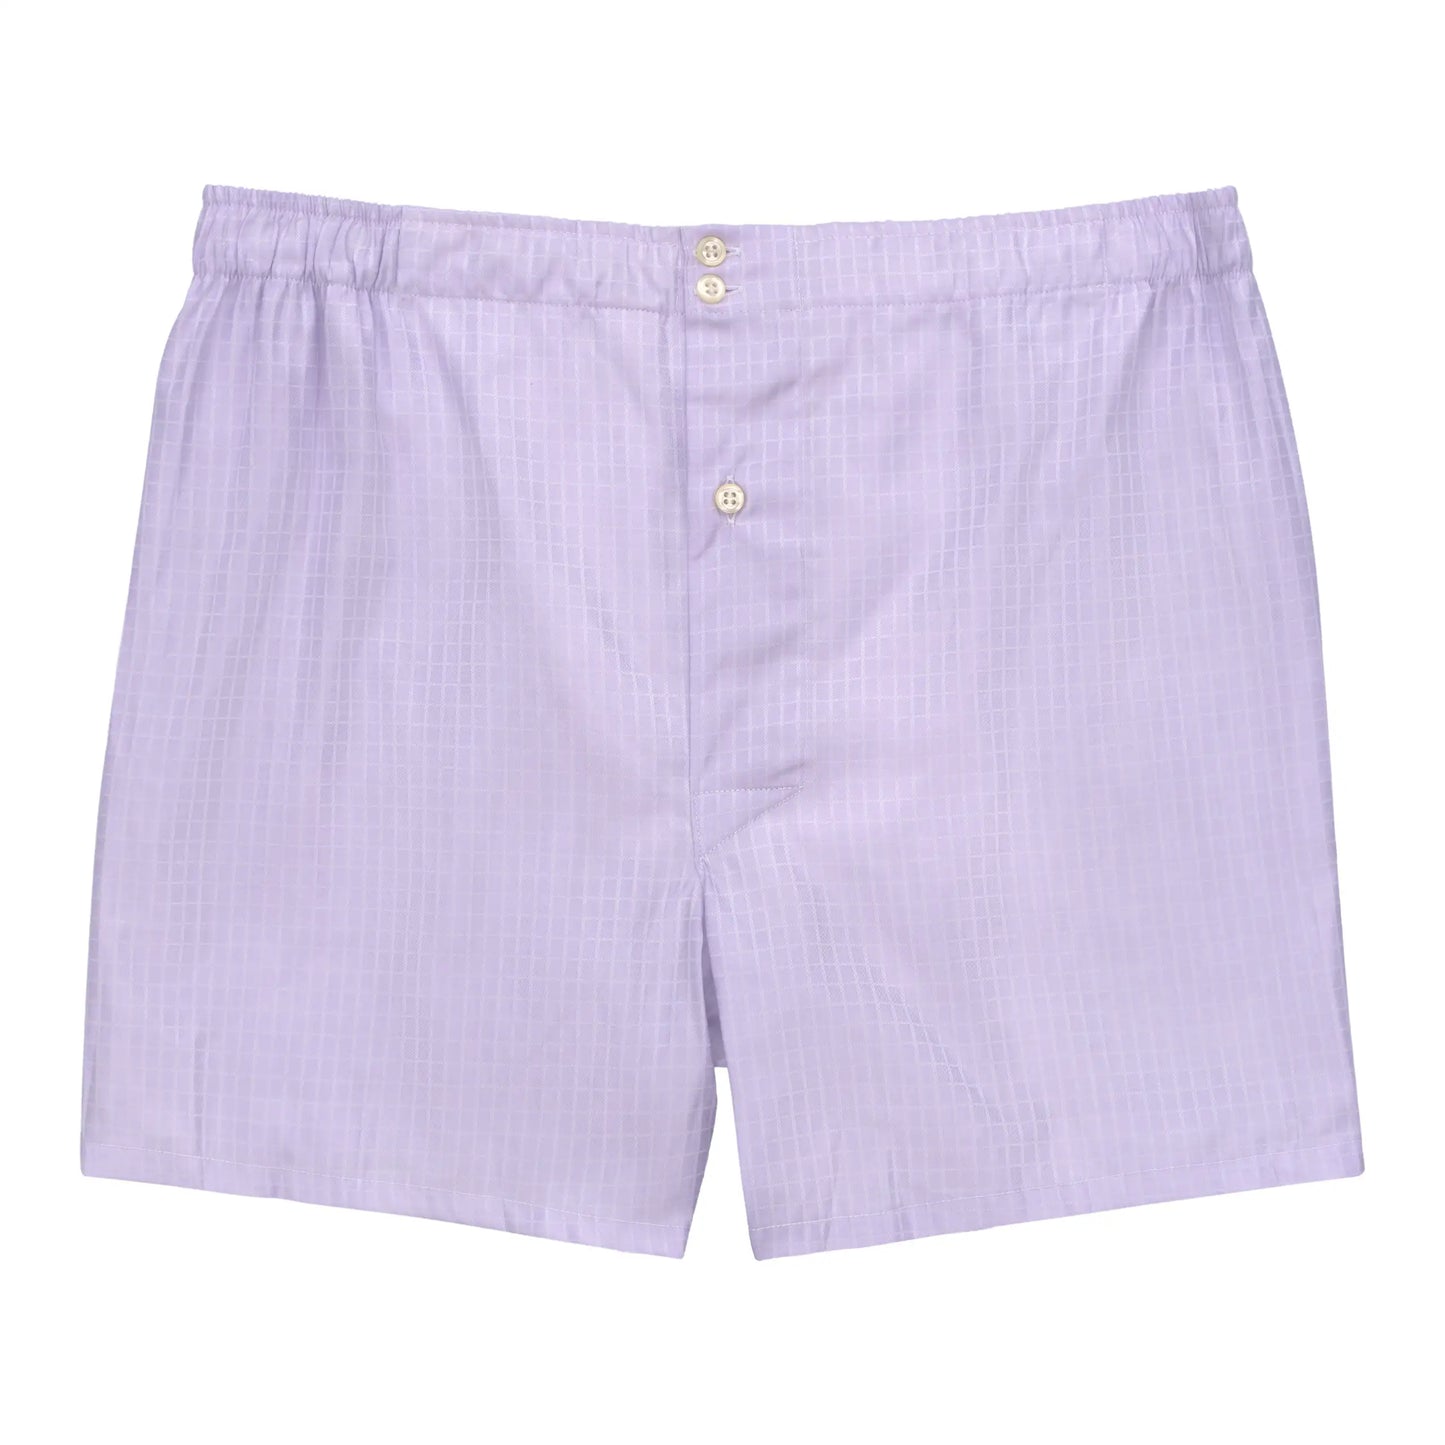 Cotton Boxer Shorts in Lilac